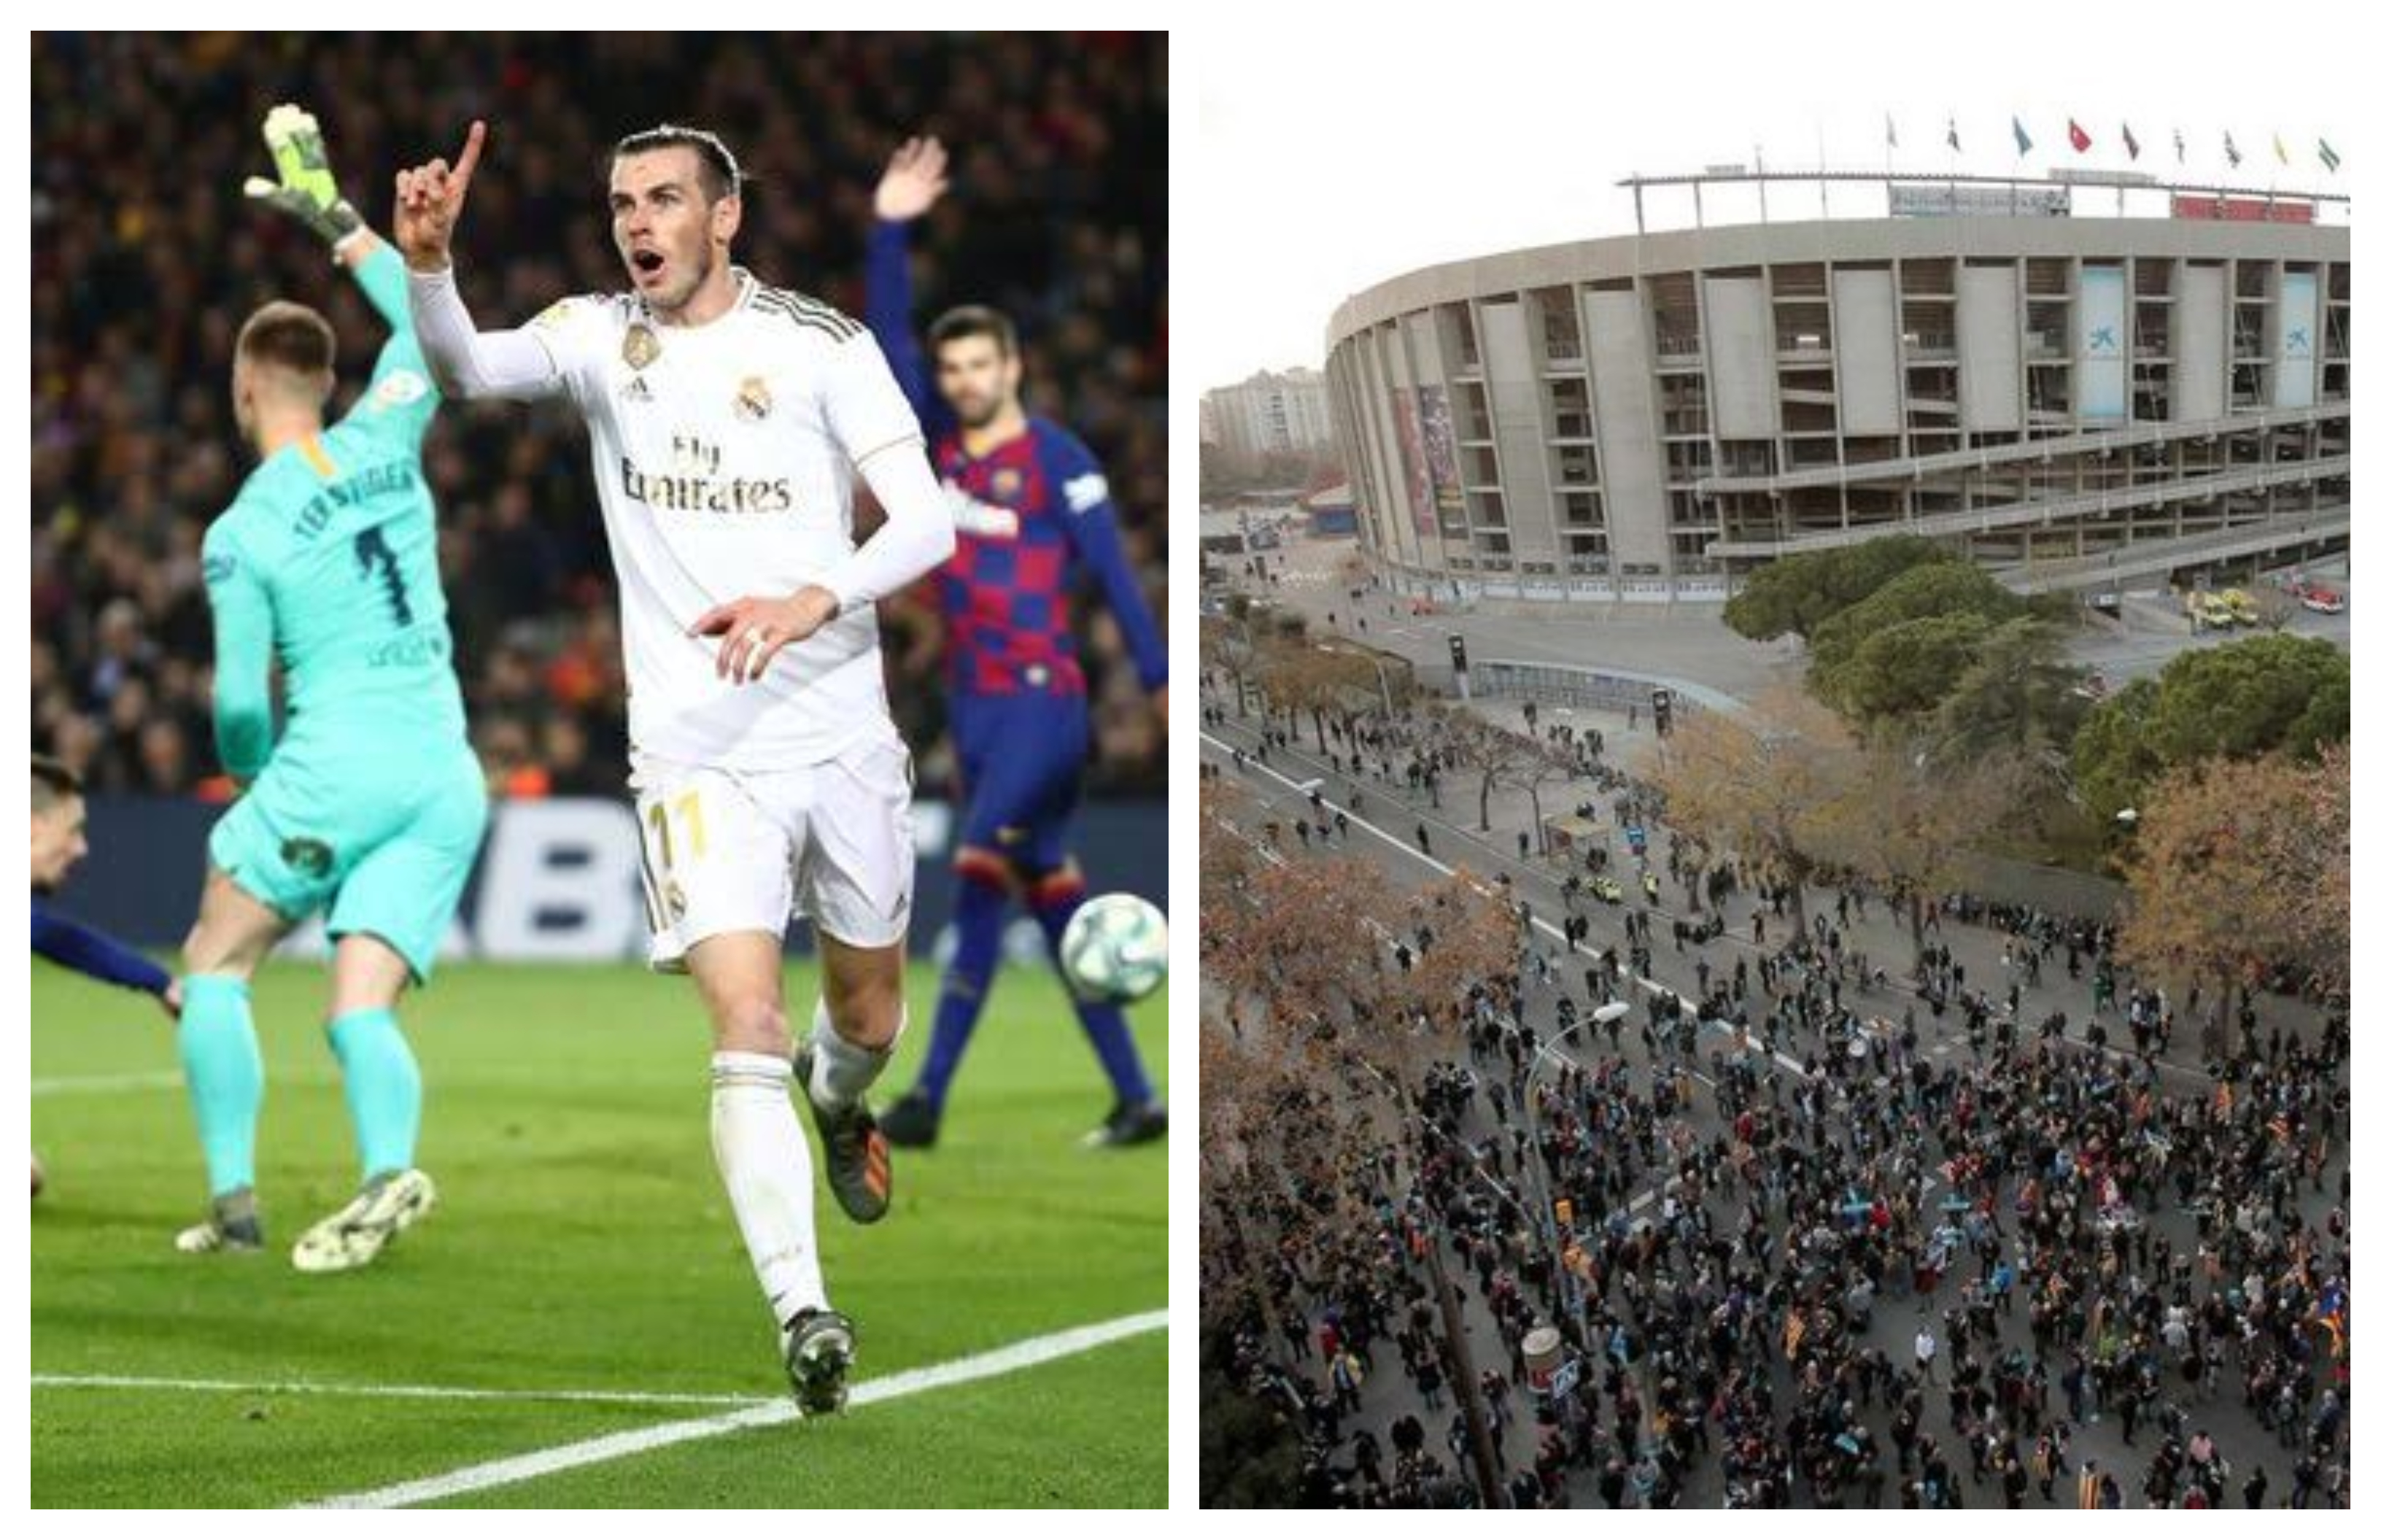 El Clasico concluded with zero goals, as protests puts pressure on match